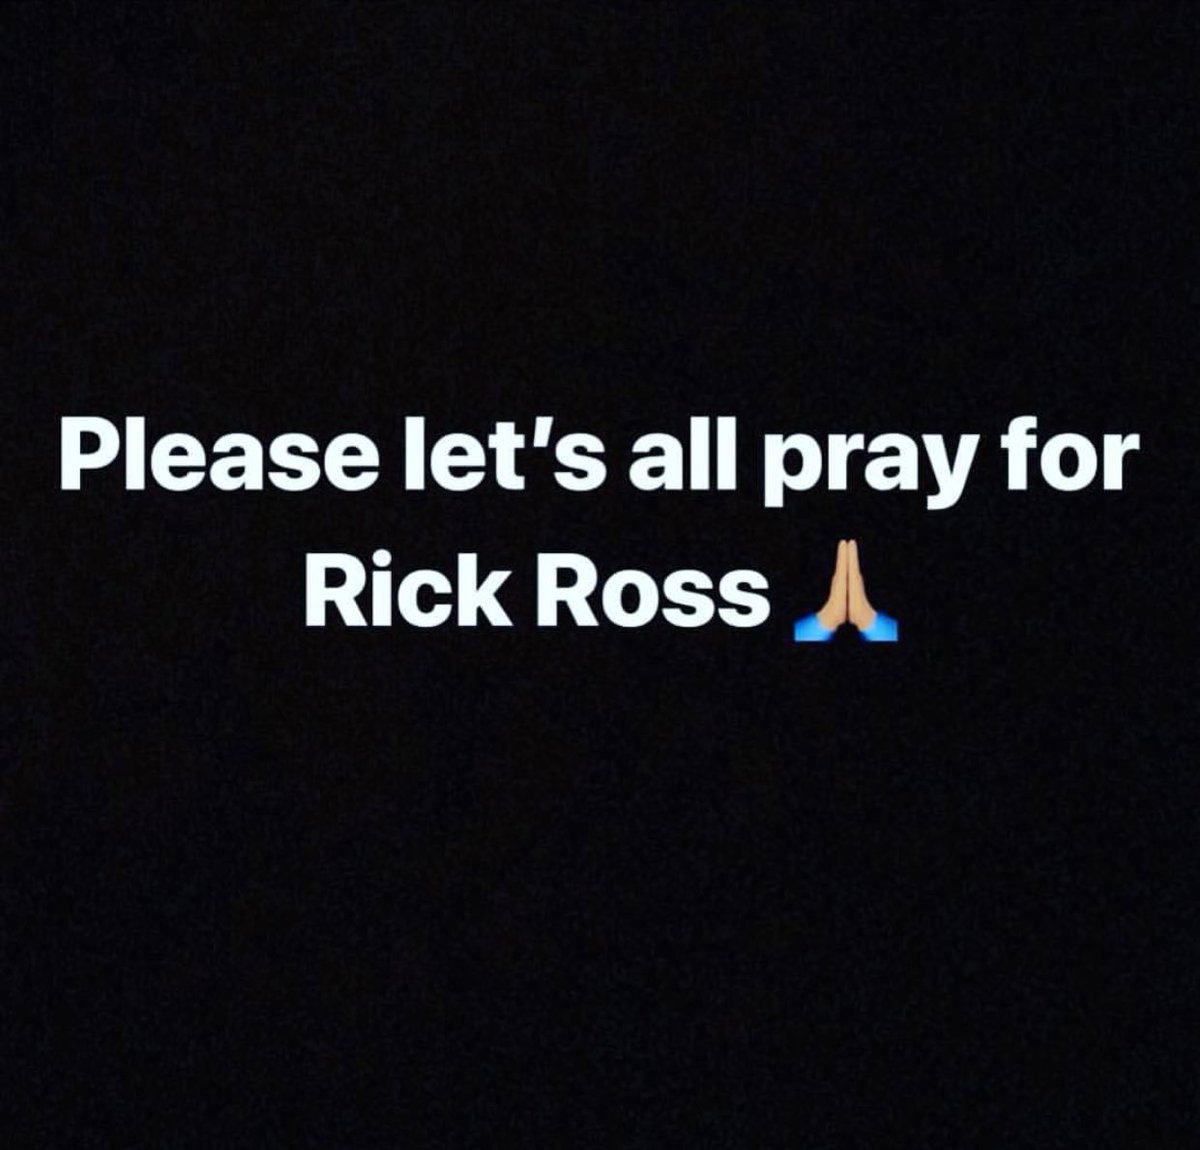 .@RickRoss You’re in my thoughts and prayers ???????????? https://t.co/GL36QPfPqh